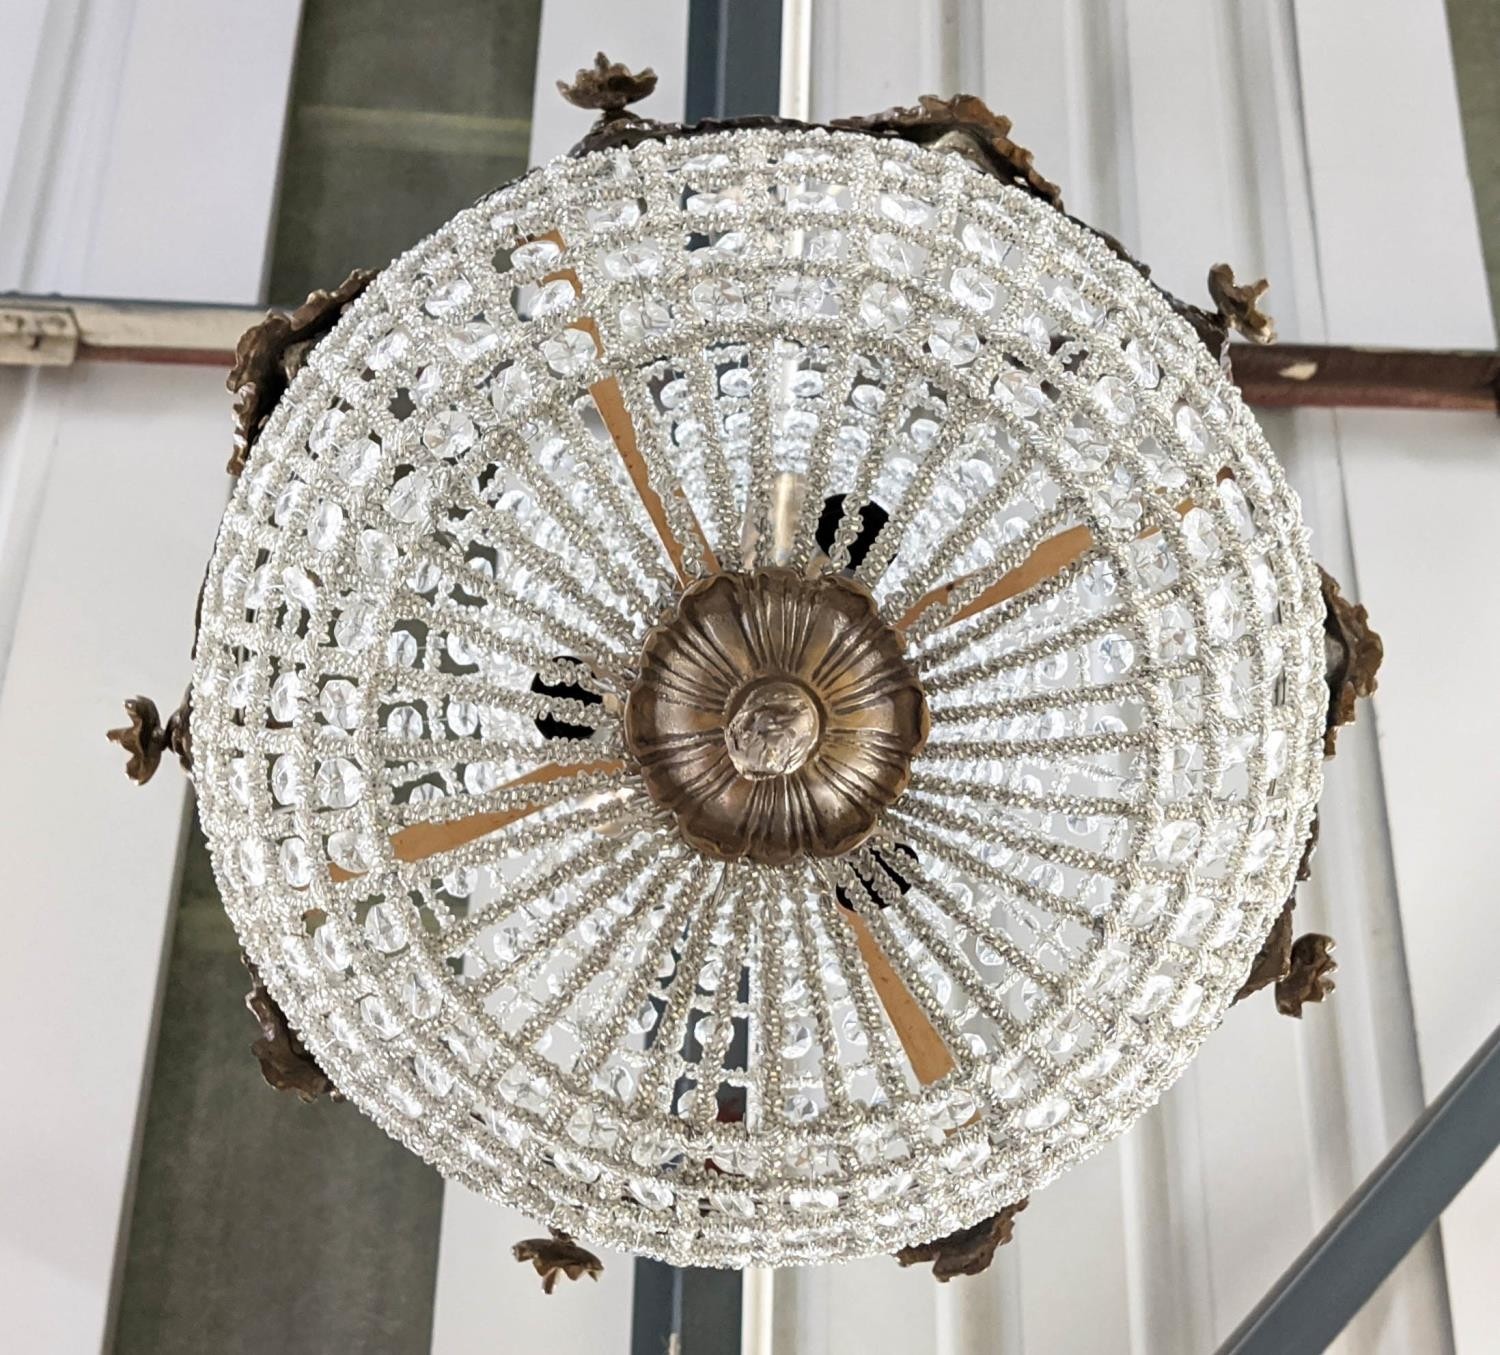 BAG CHANDELIERS, a pair, French Empire style, 80cm drop each. (2) - Image 3 of 4